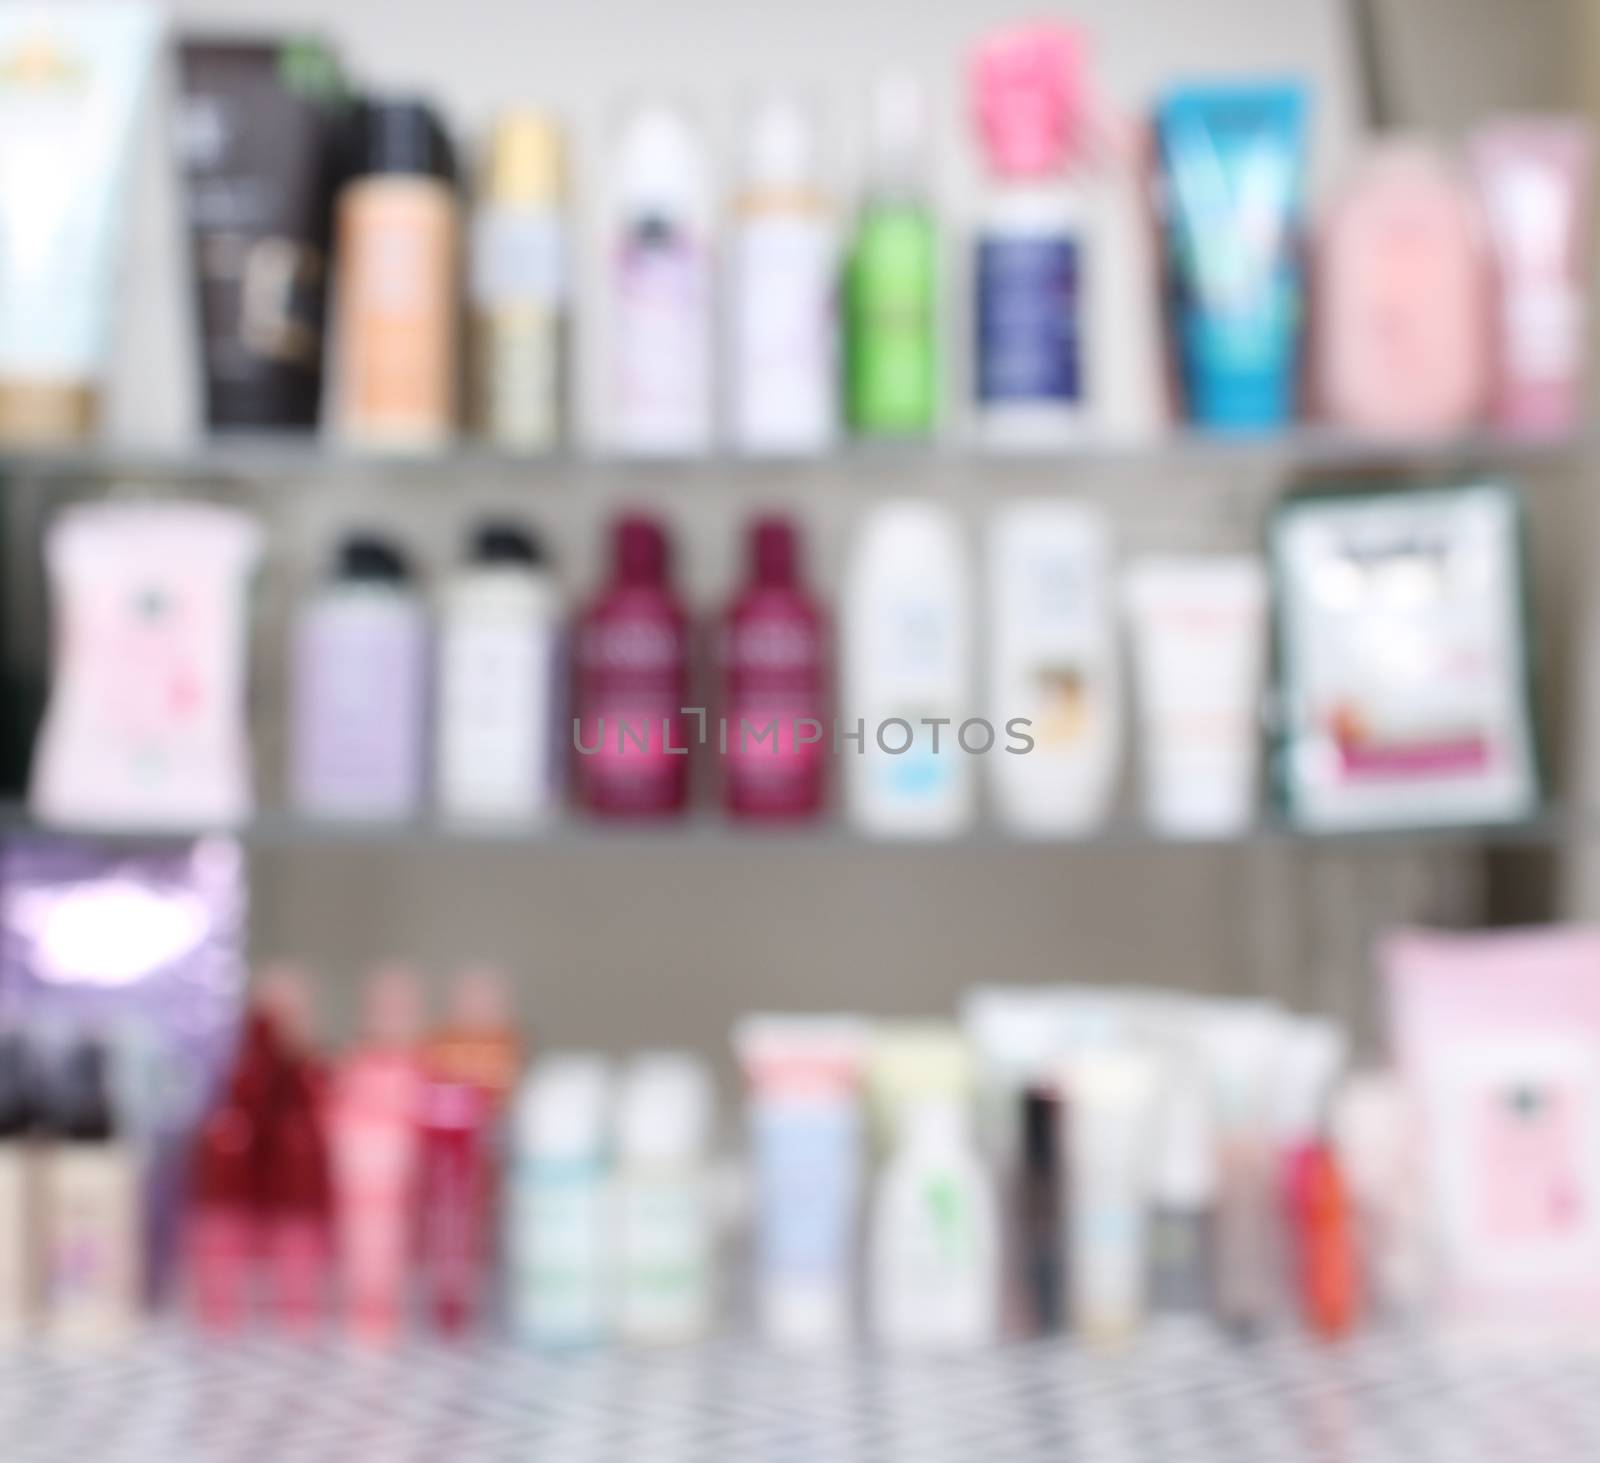 Blurred Background Cosmetics and Beauty Products by Marti157900